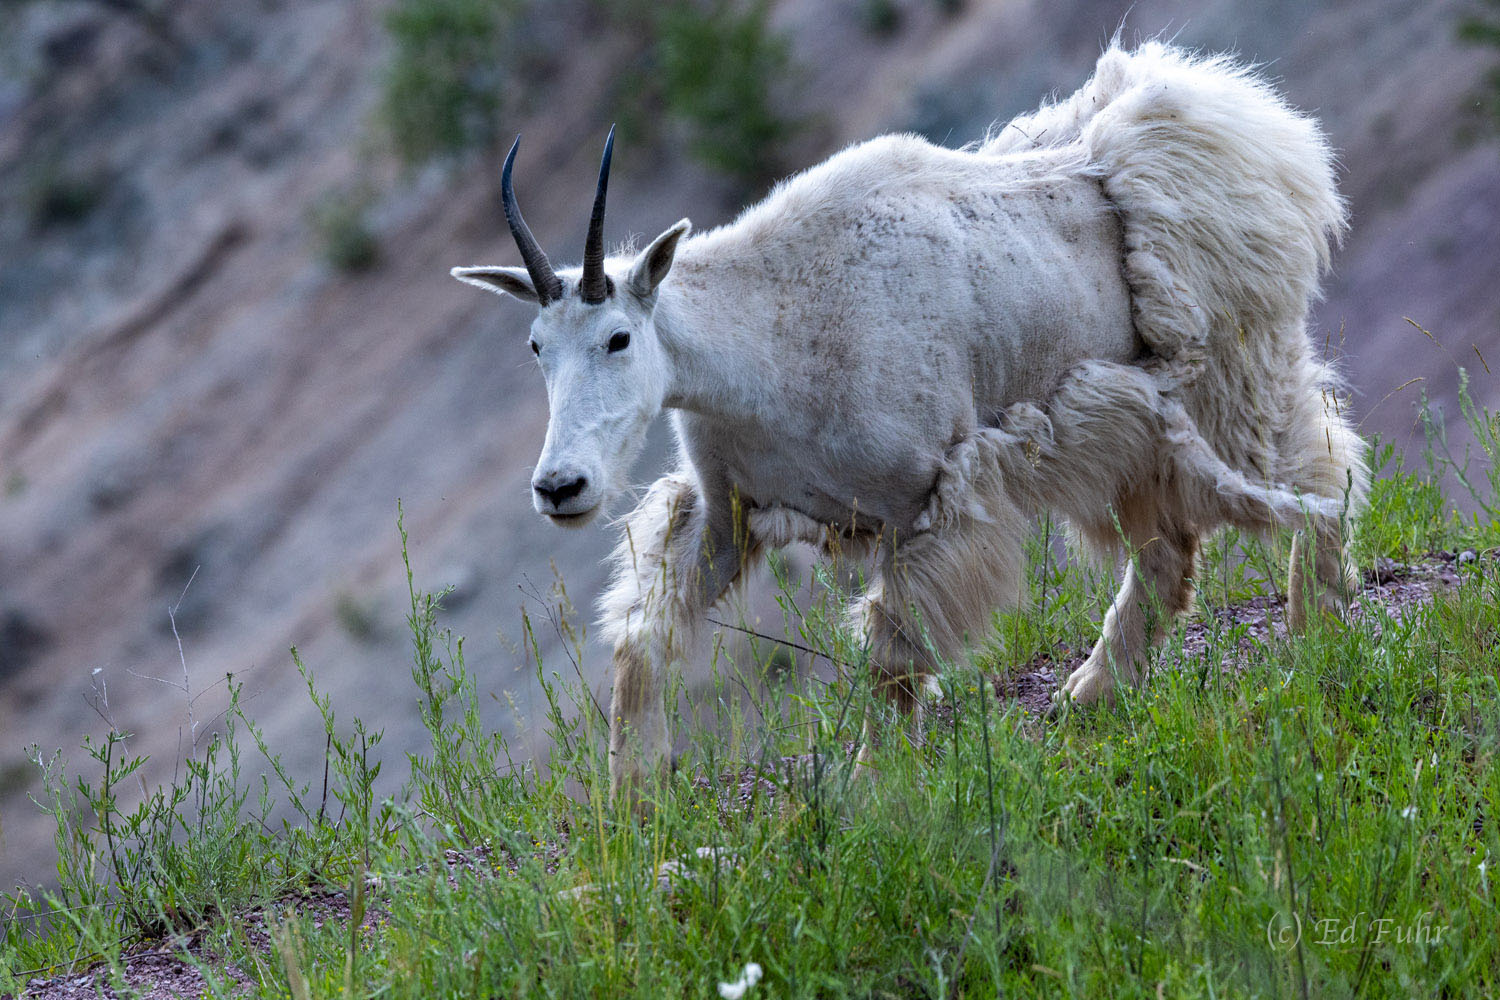 As the season turns from spring to summer, the mountain goats of Glacier National Park lose their winter coats.